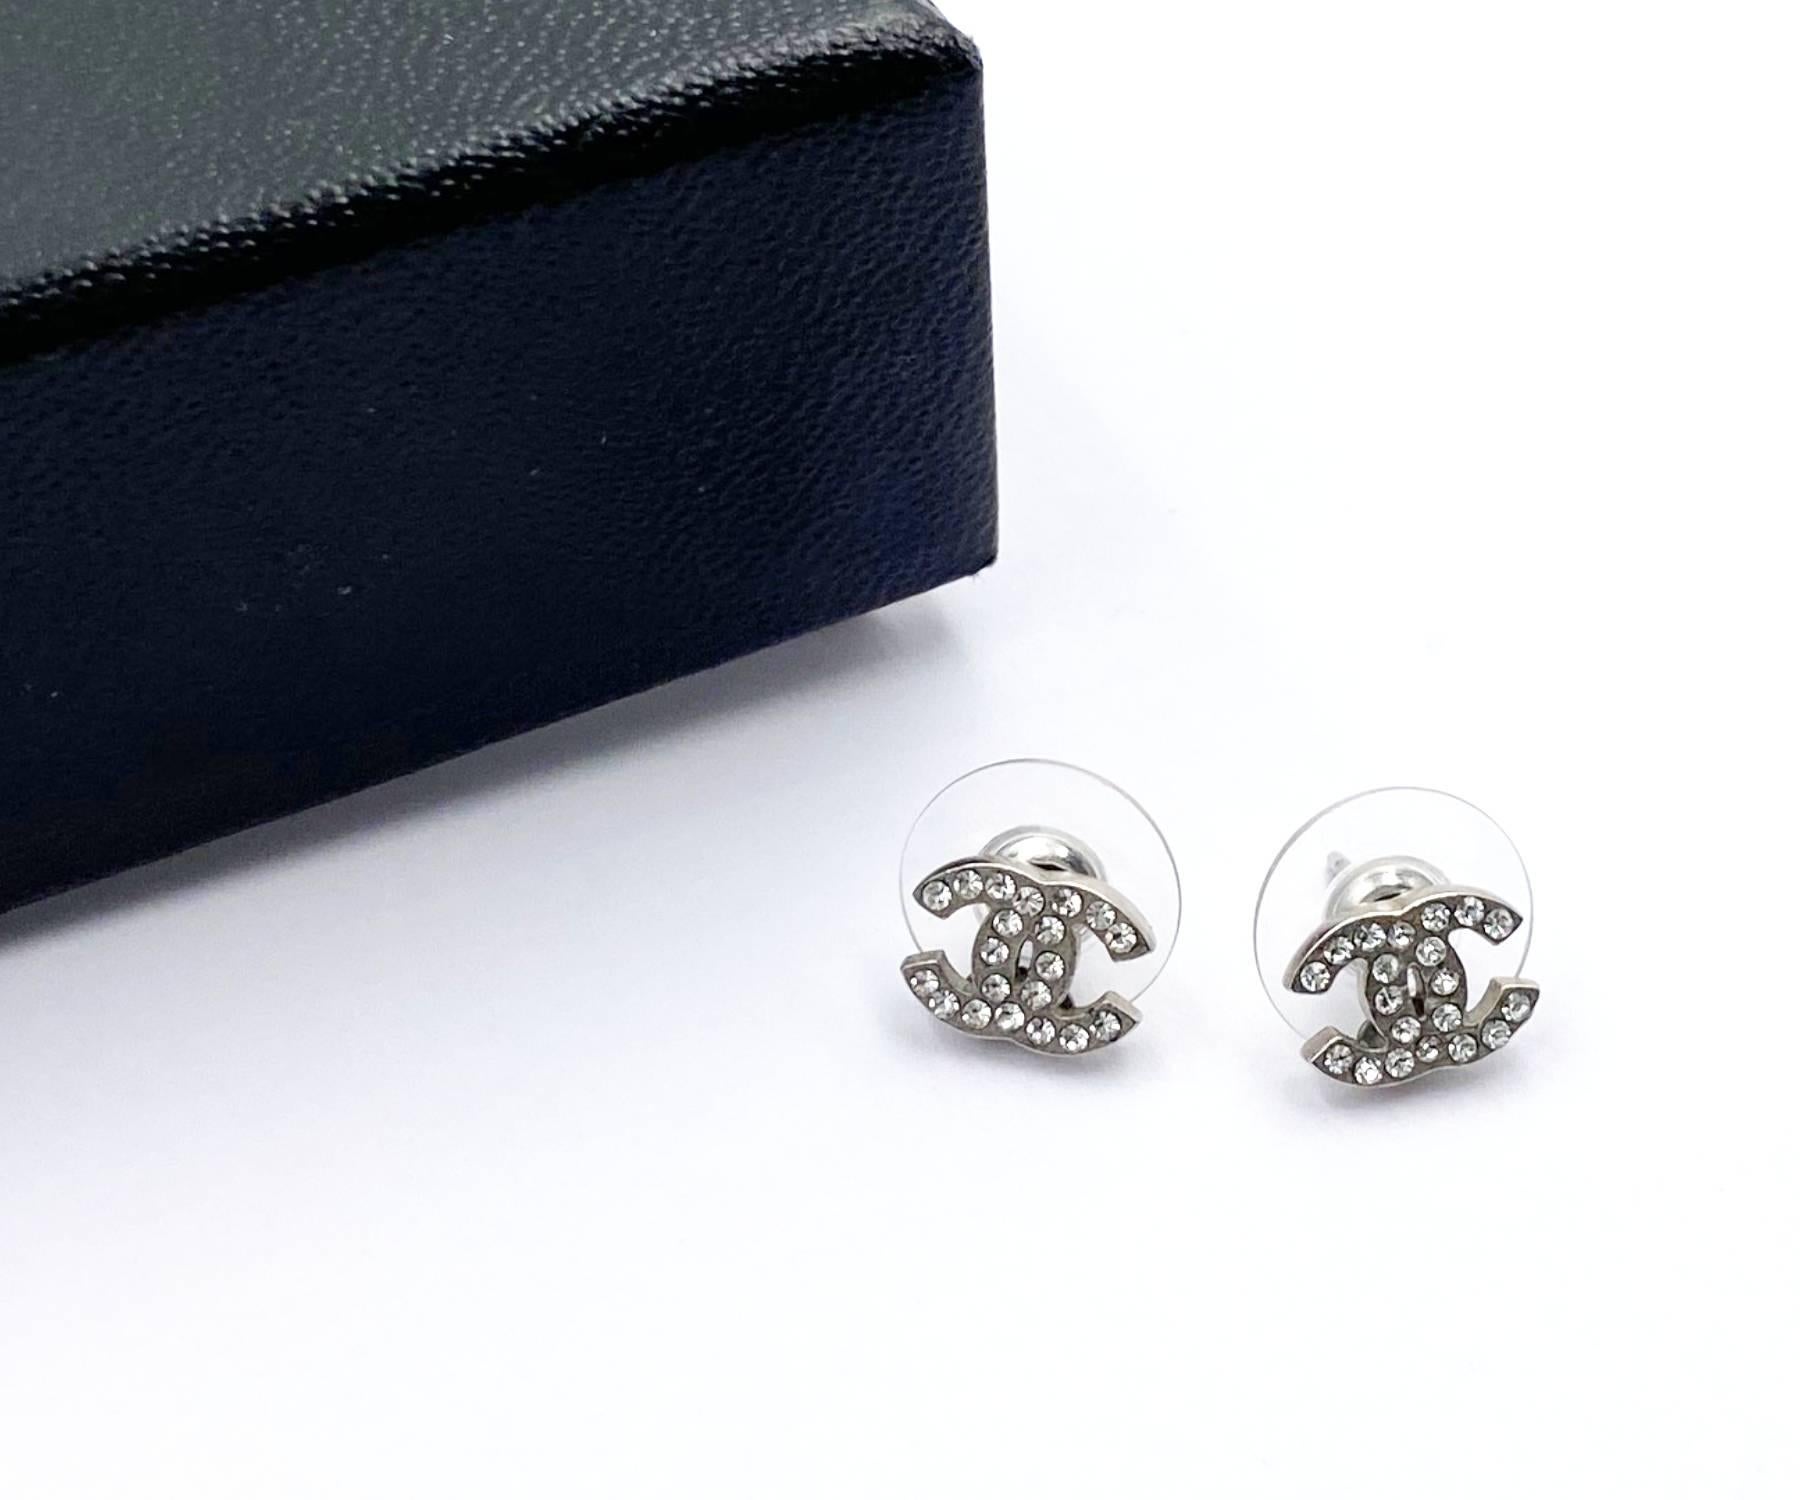 Chanel Classic Silver CC Crystal Small Piercing Earrings

*Marked 11
*Made in France
*Comes with the original box

-Approximately 0.3